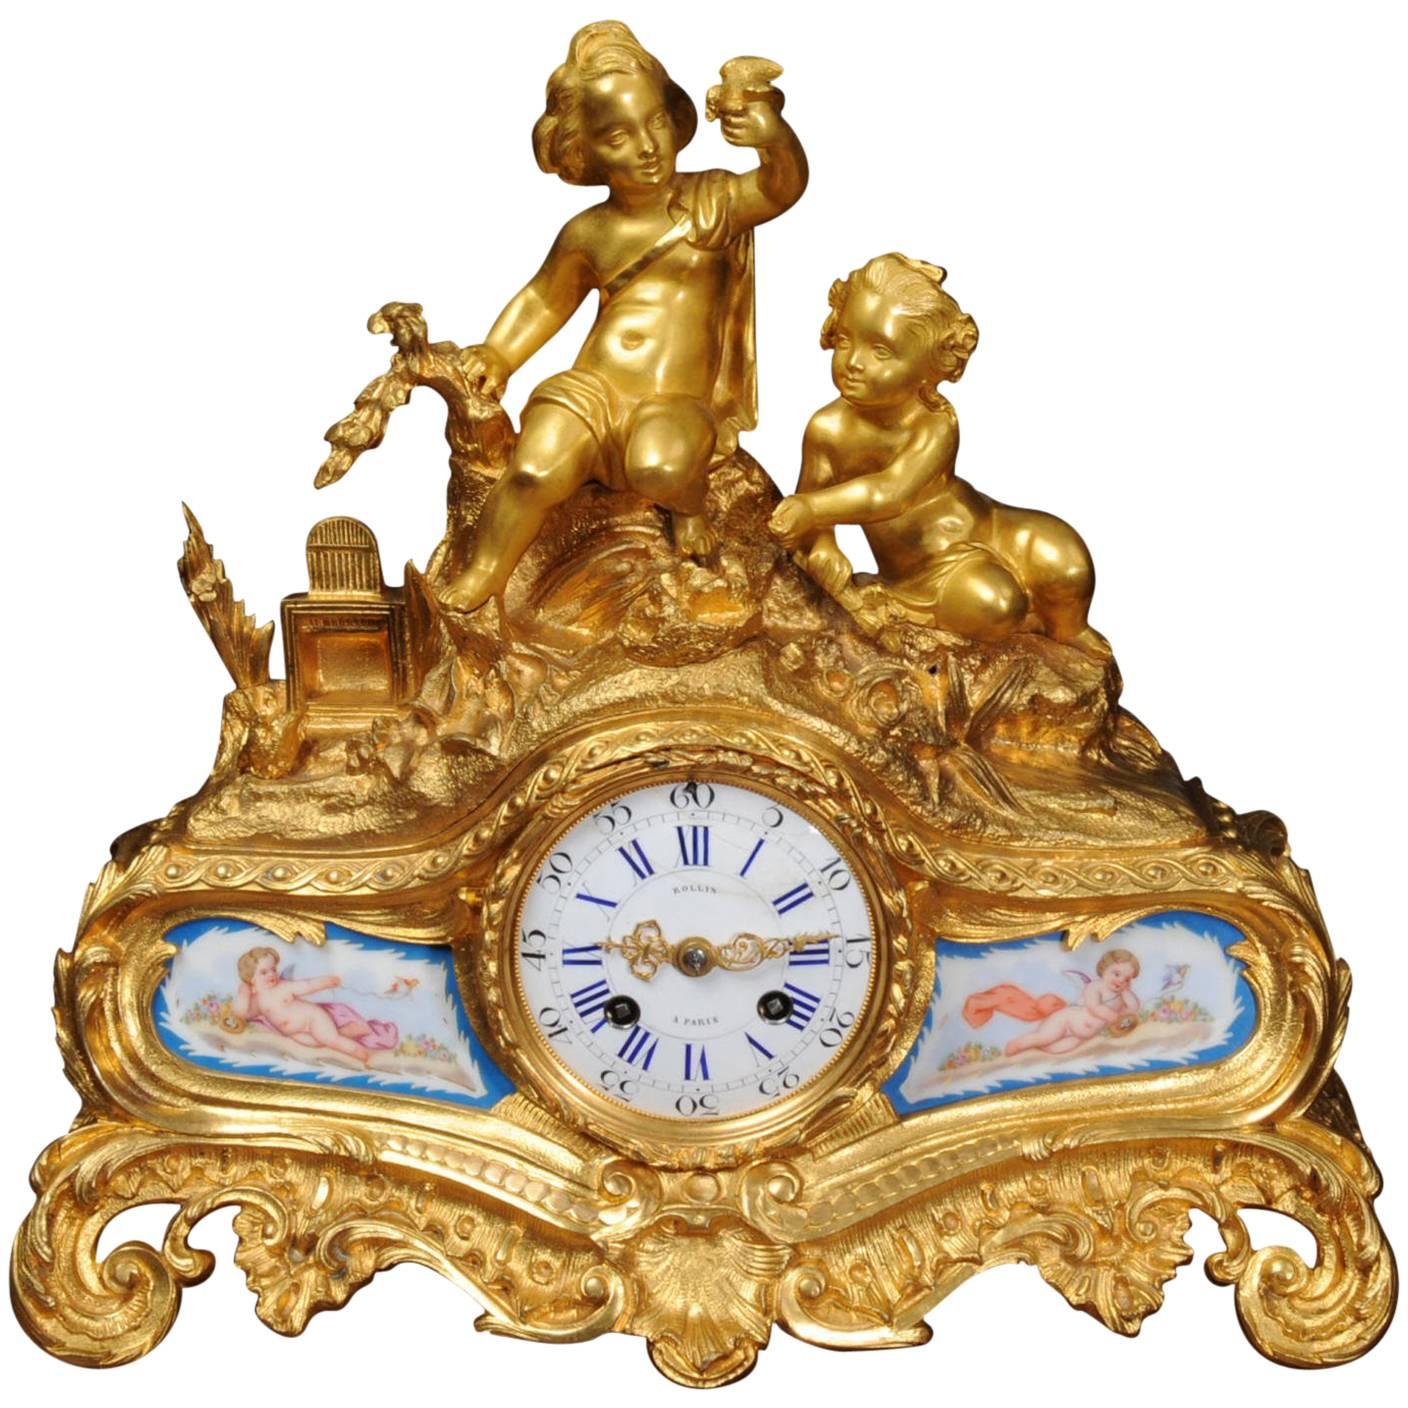 Fine Early Ormolu and Sevres Porcelain Boudoir Clock, Japy Freres